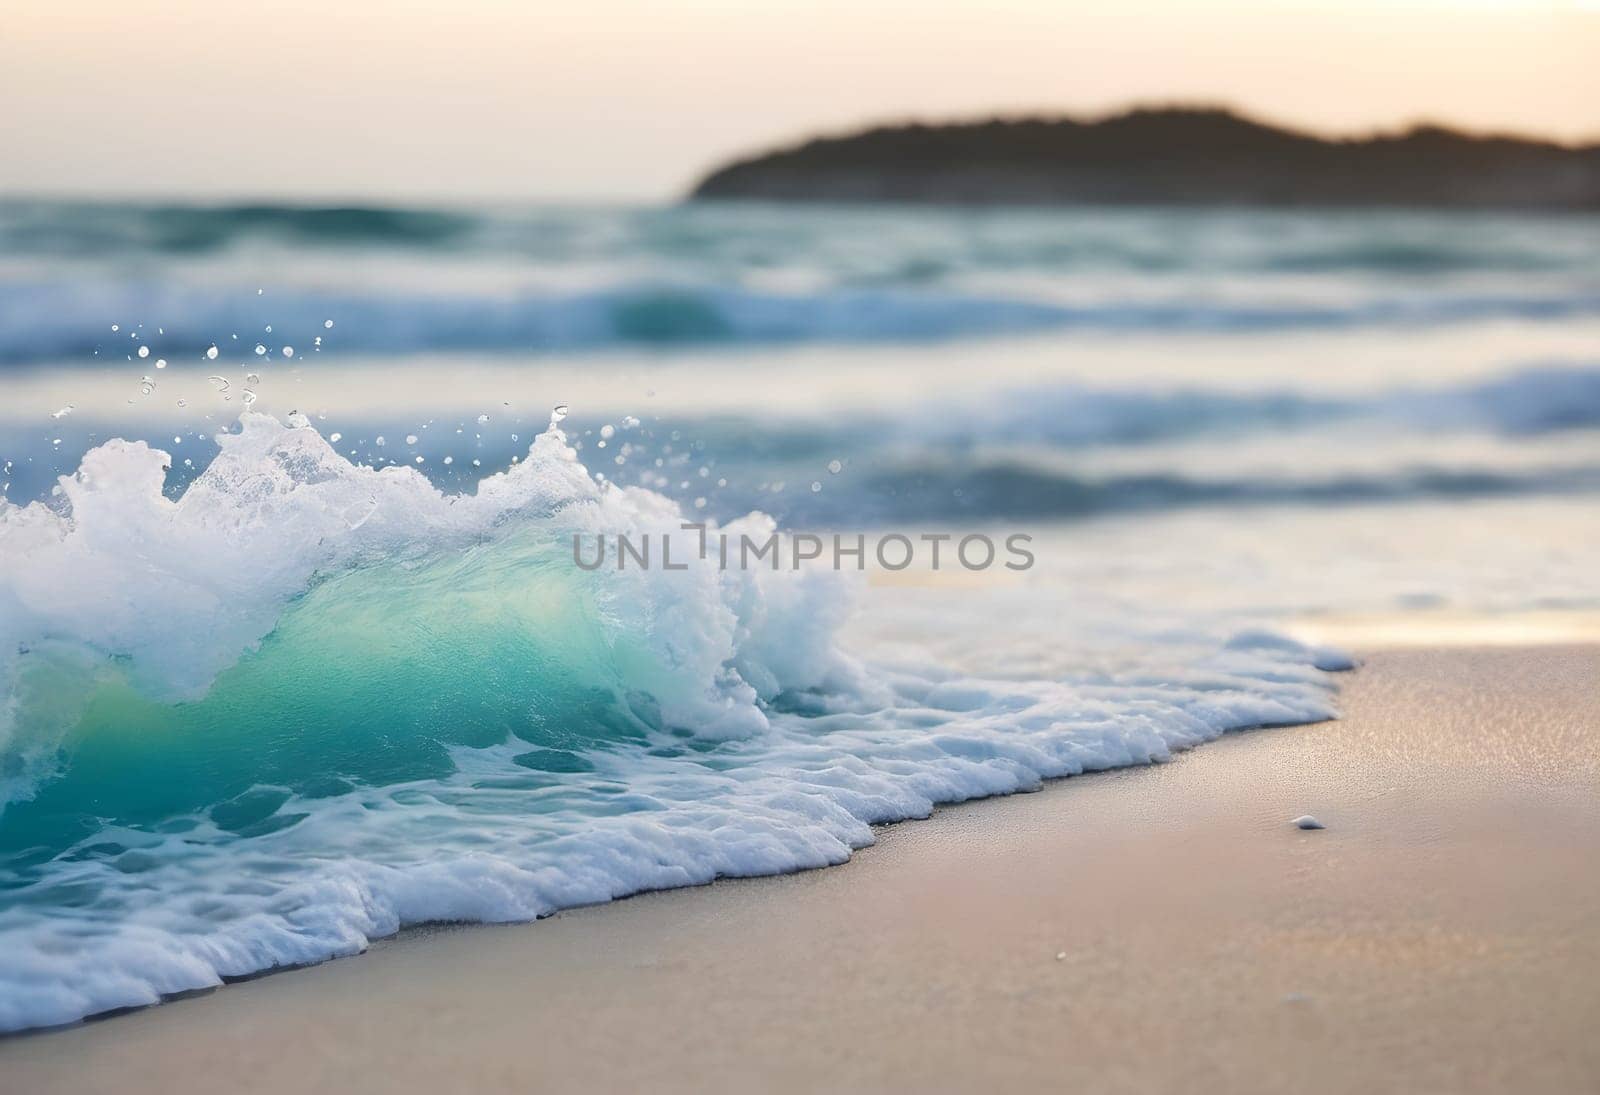 Ocean Serenity: Tranquil Waves on the Coastline by Petrichor